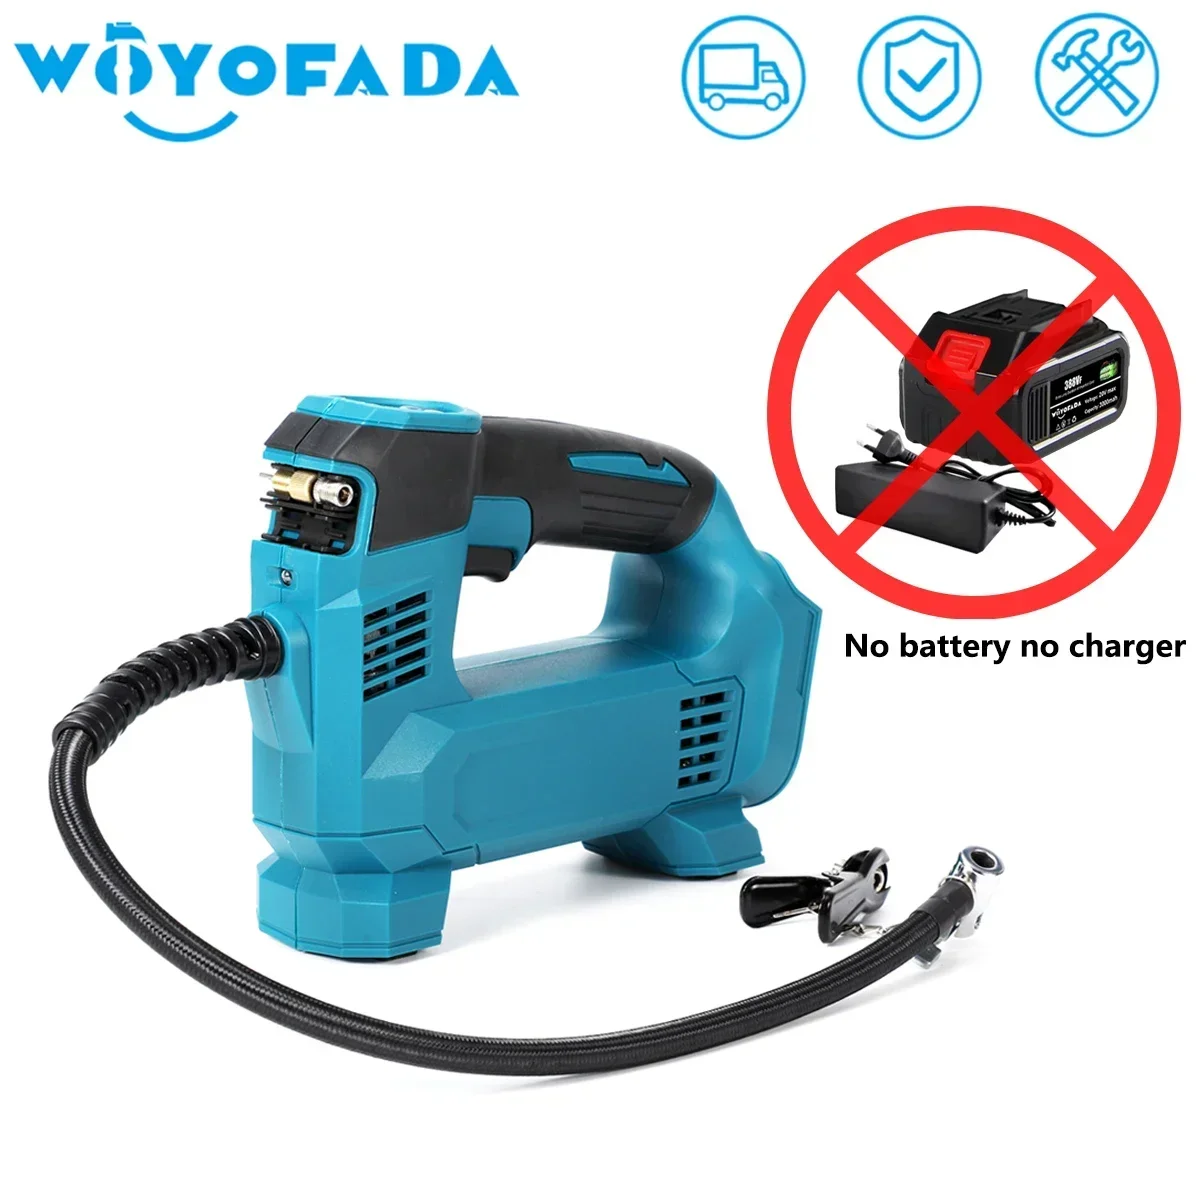 WOYOFADA Cordless Portable Electric Air Pump Car Tire Inflator Air Compressor For Car Bicycle Tires Balls For Makita 18V Battery eleglide m1 plus 29 inch electric bike 36v 12 5ah battery 100km range 250w brushless motor 25km h max speed shimano 21 speed gear 100km top range dual disc brakes cozy foam saddle 29 x2 1 cst tires mtb moped bike